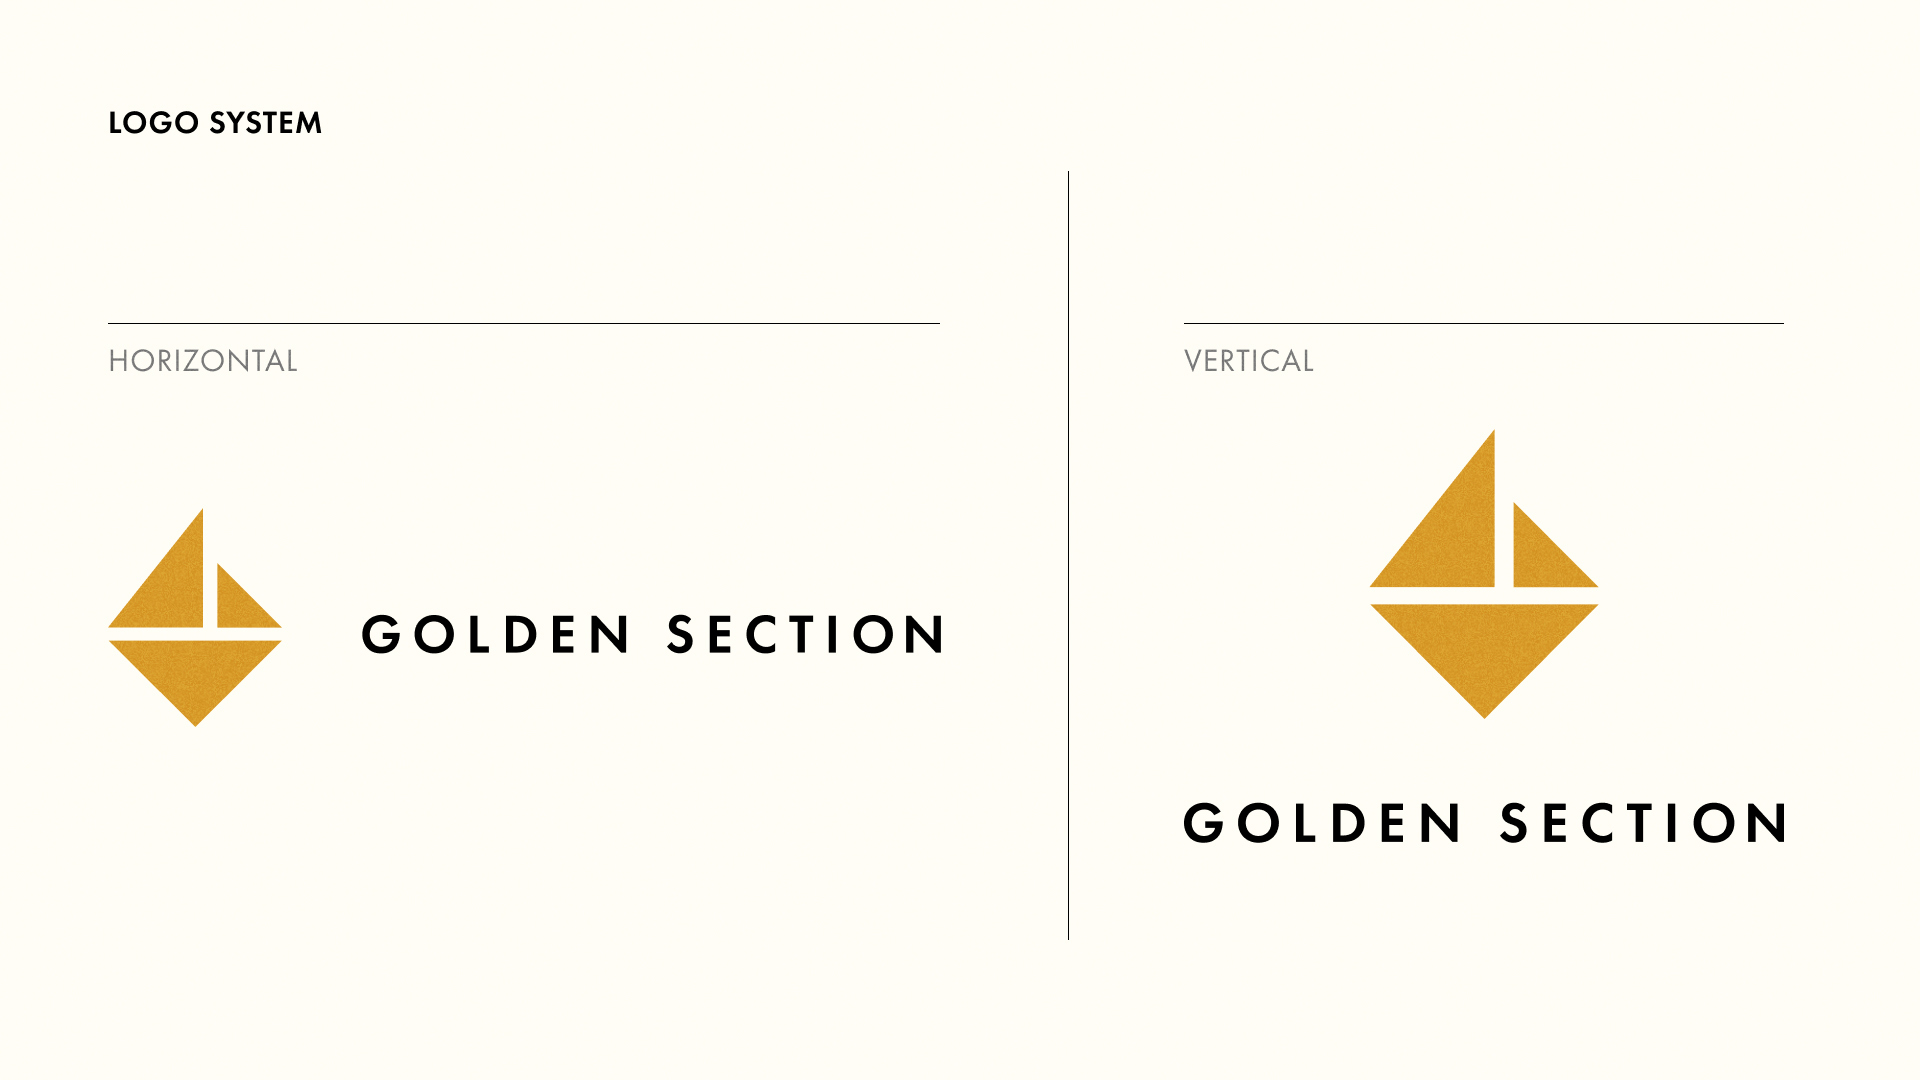 Golden Section logo displayed horizontal and vertical